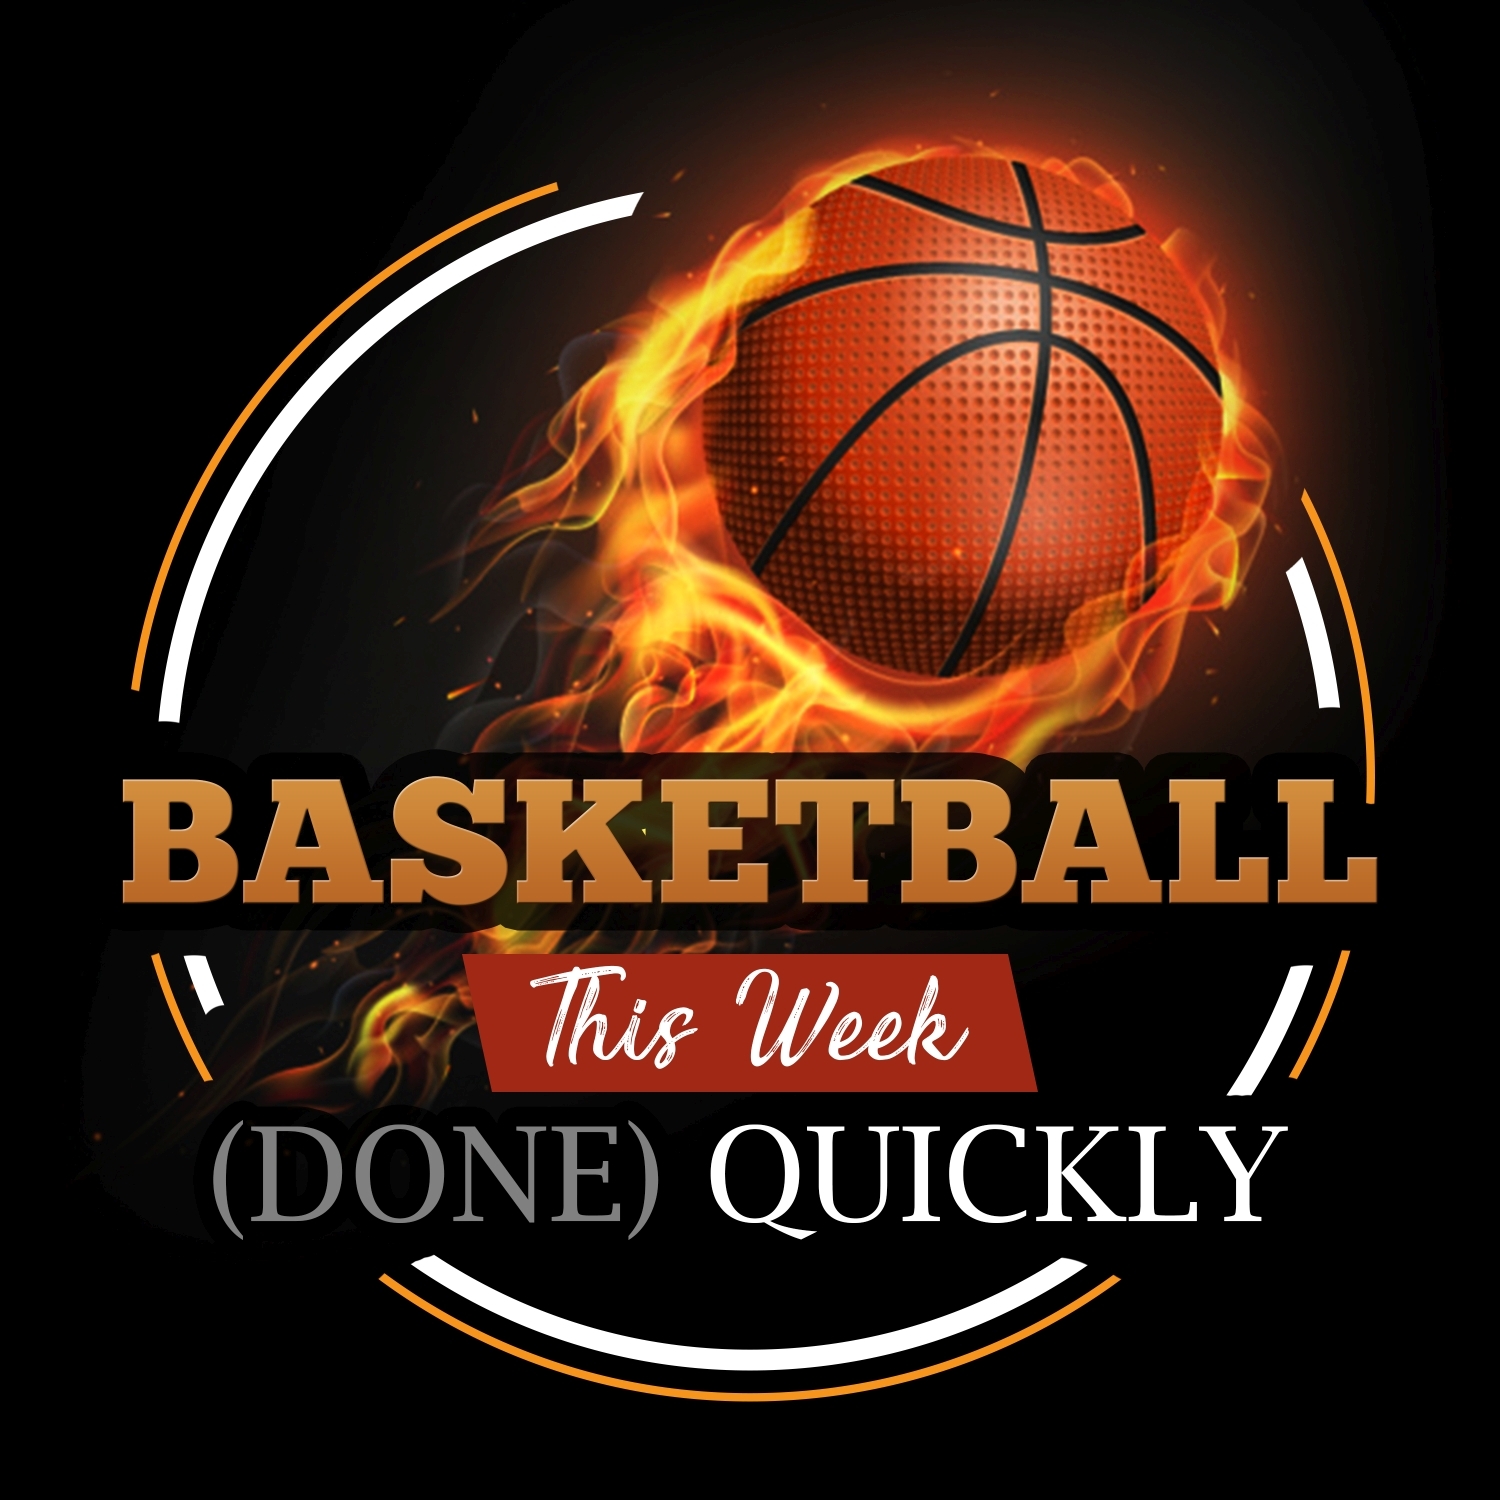 Basketball This Week (Done) Quickly